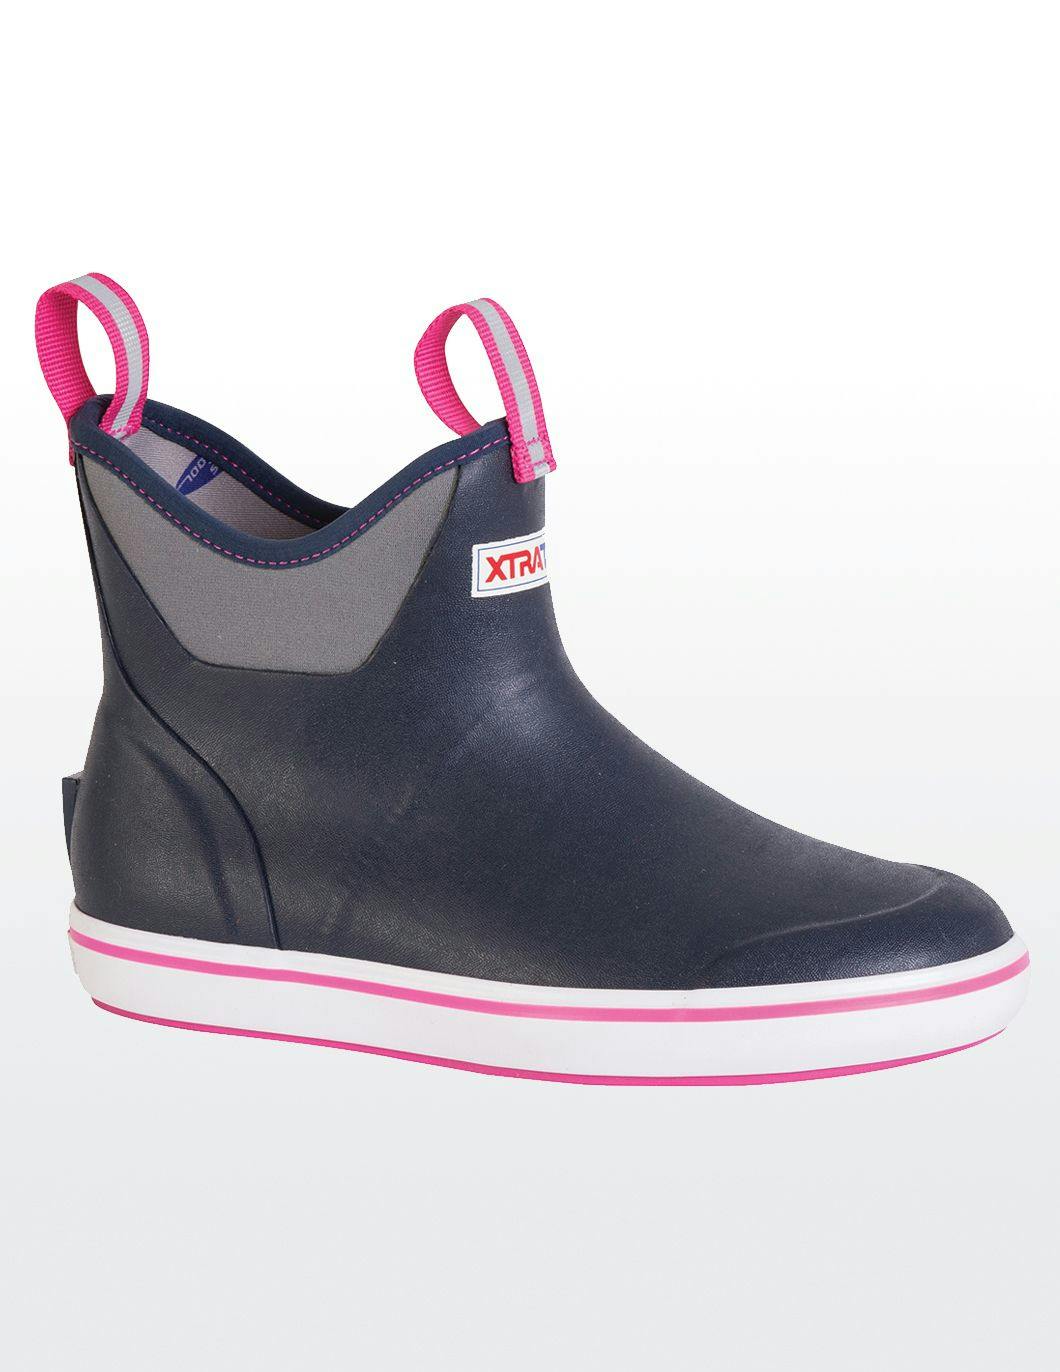  xtratuf-womens-ankle-deck-boot-navy-pink